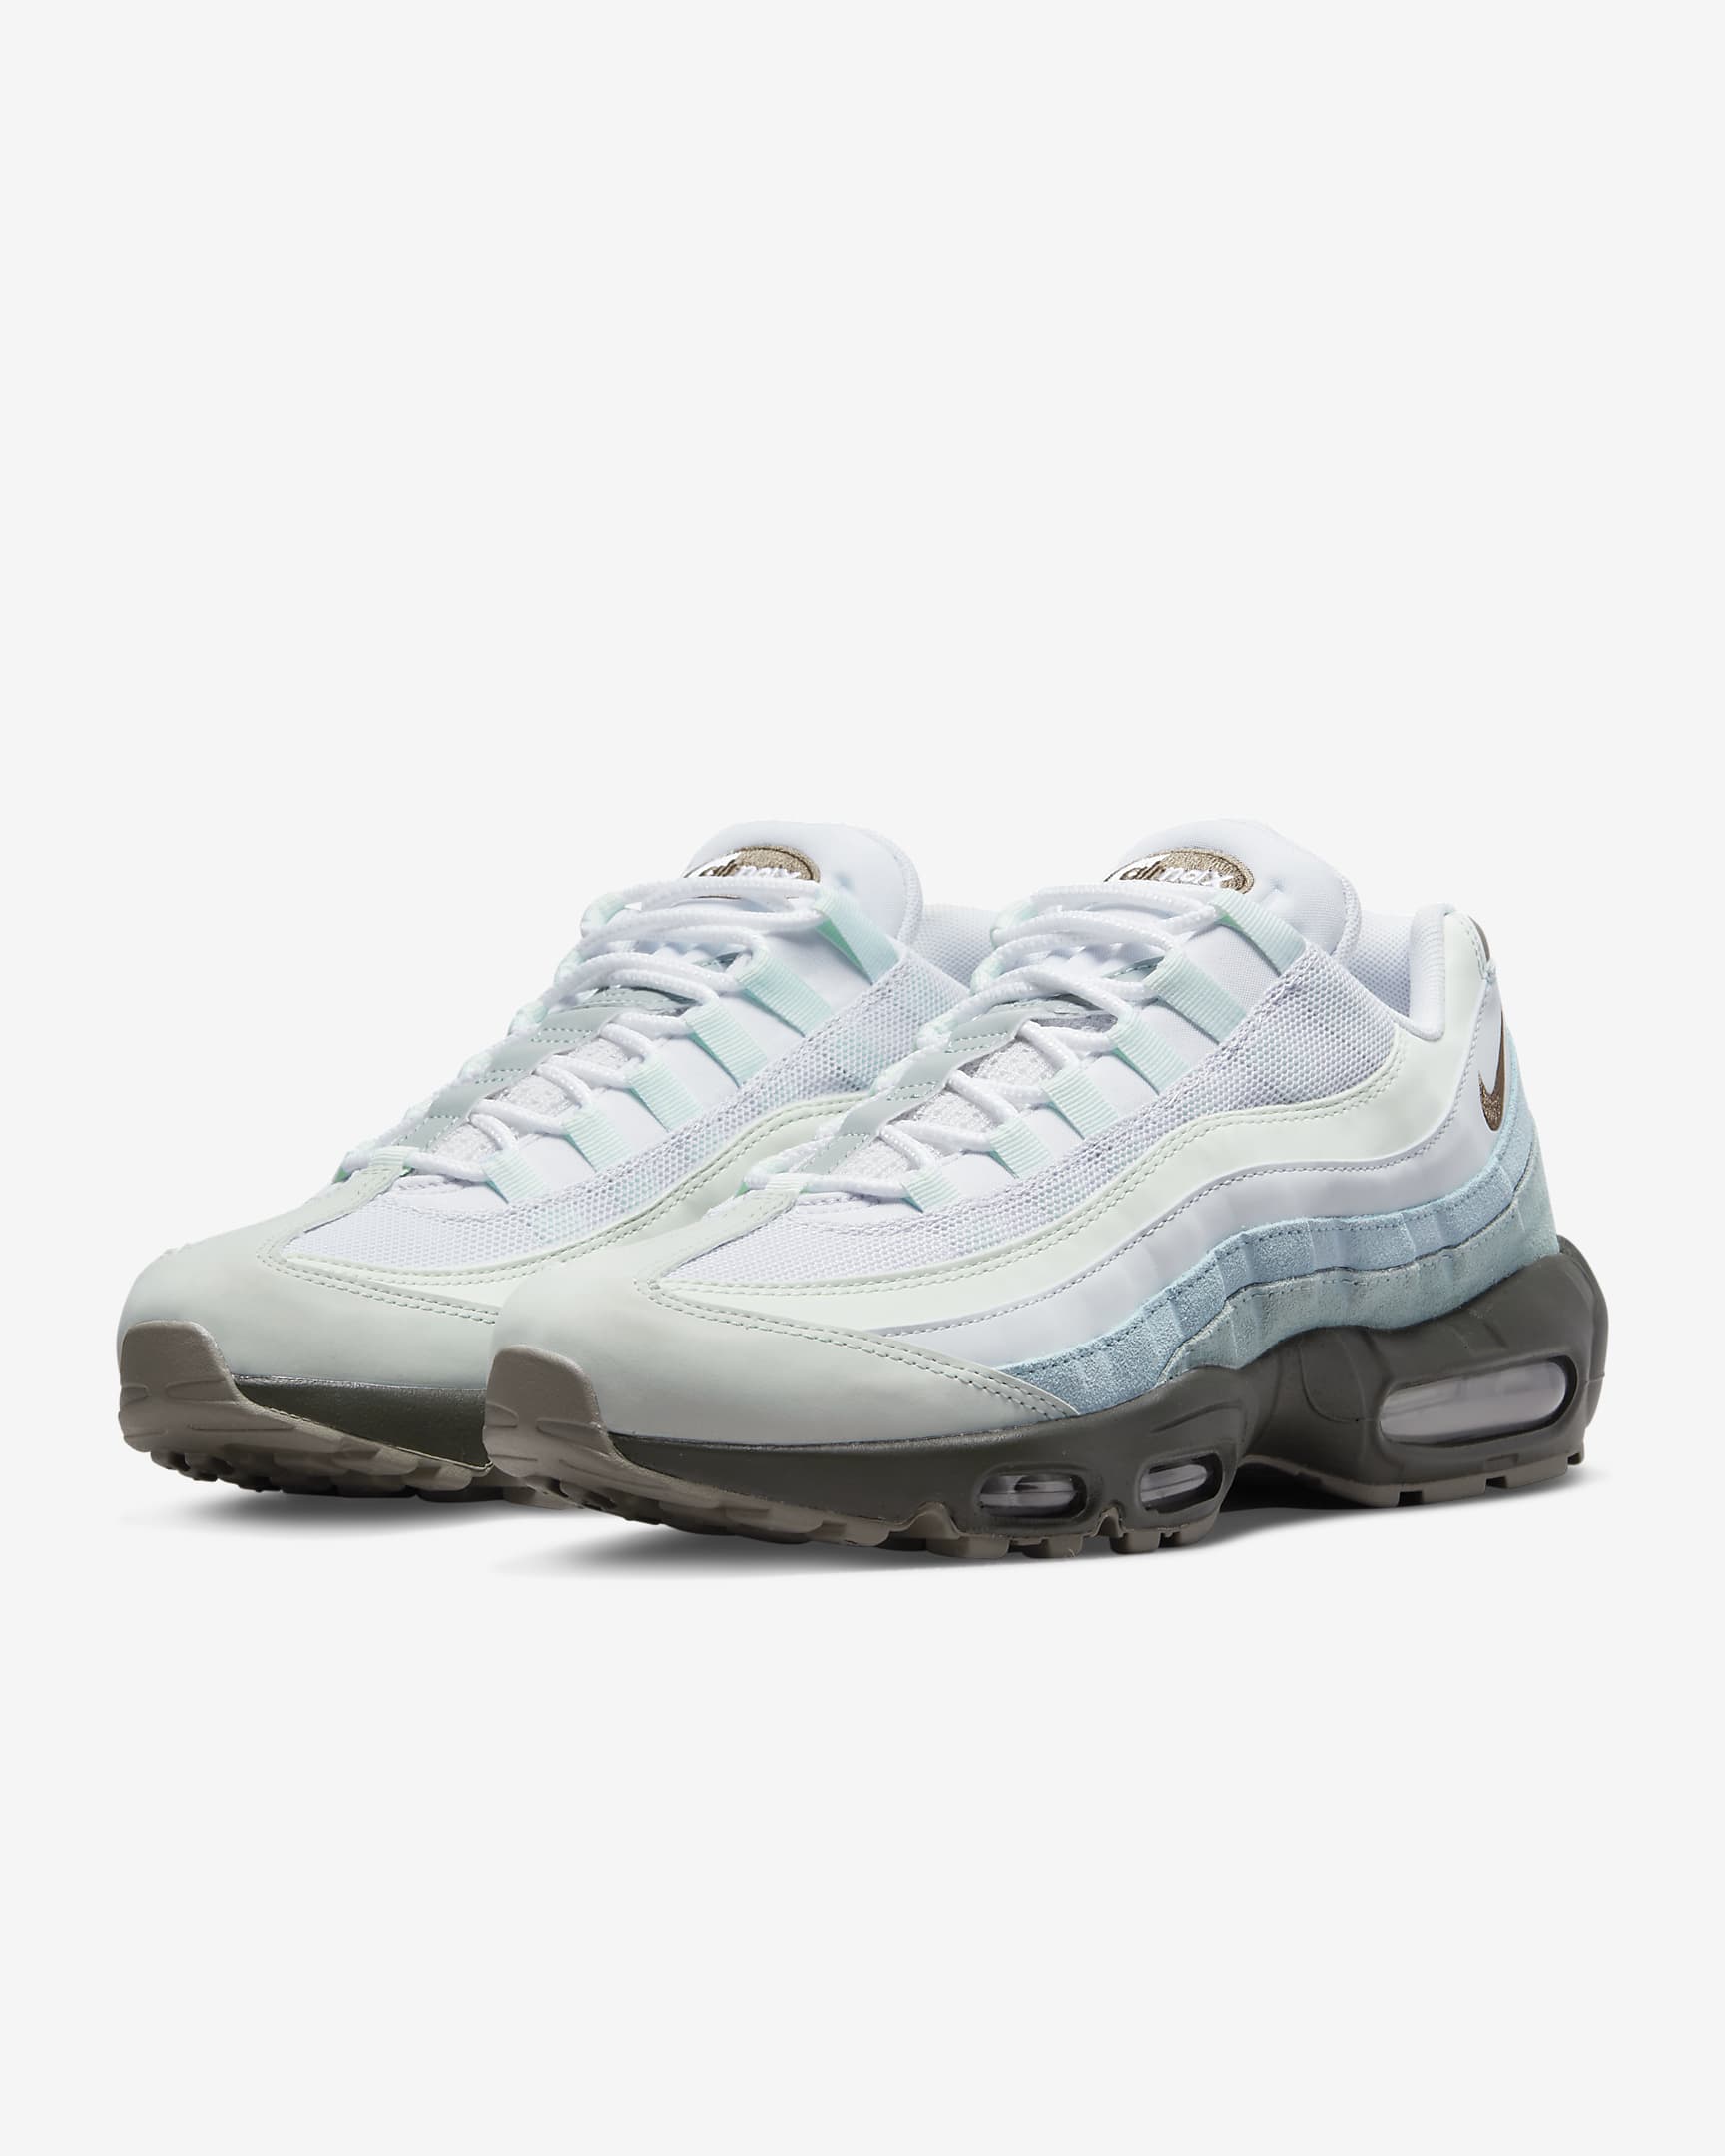 The best Nike Air Max 95 sneakers to shop now